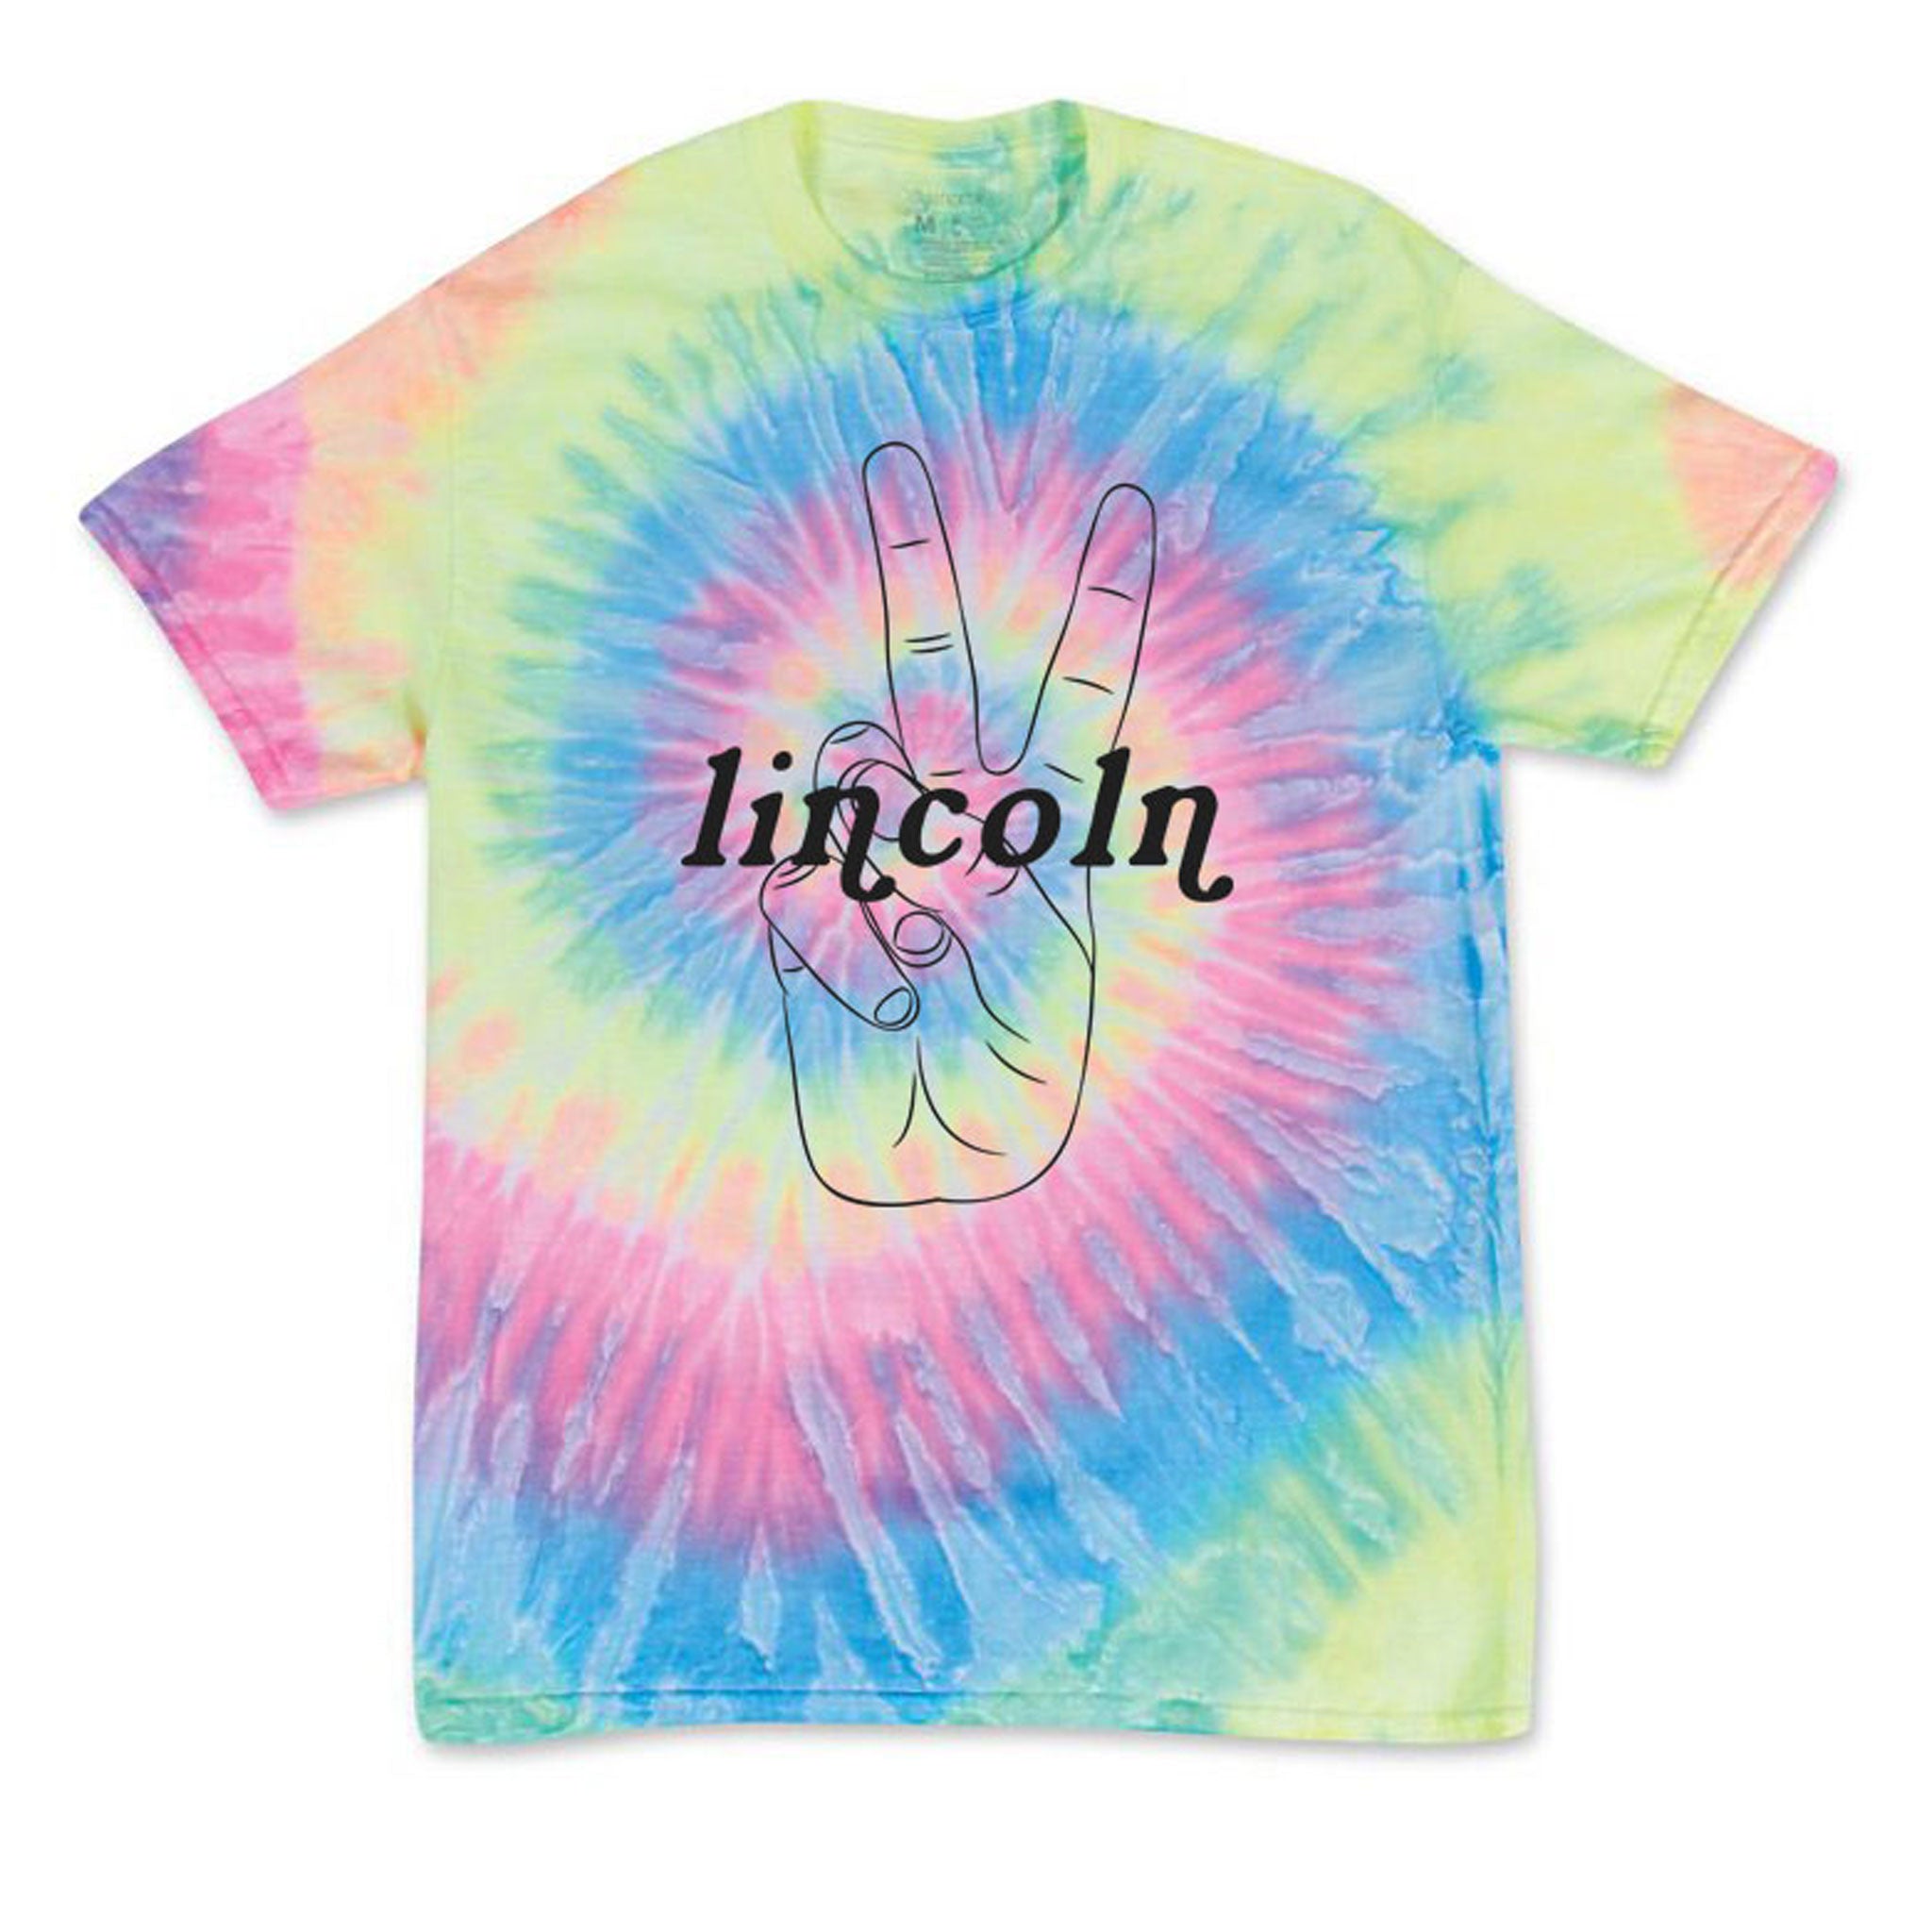 Lincoln Youth Tie Dye Tee - Day Glow